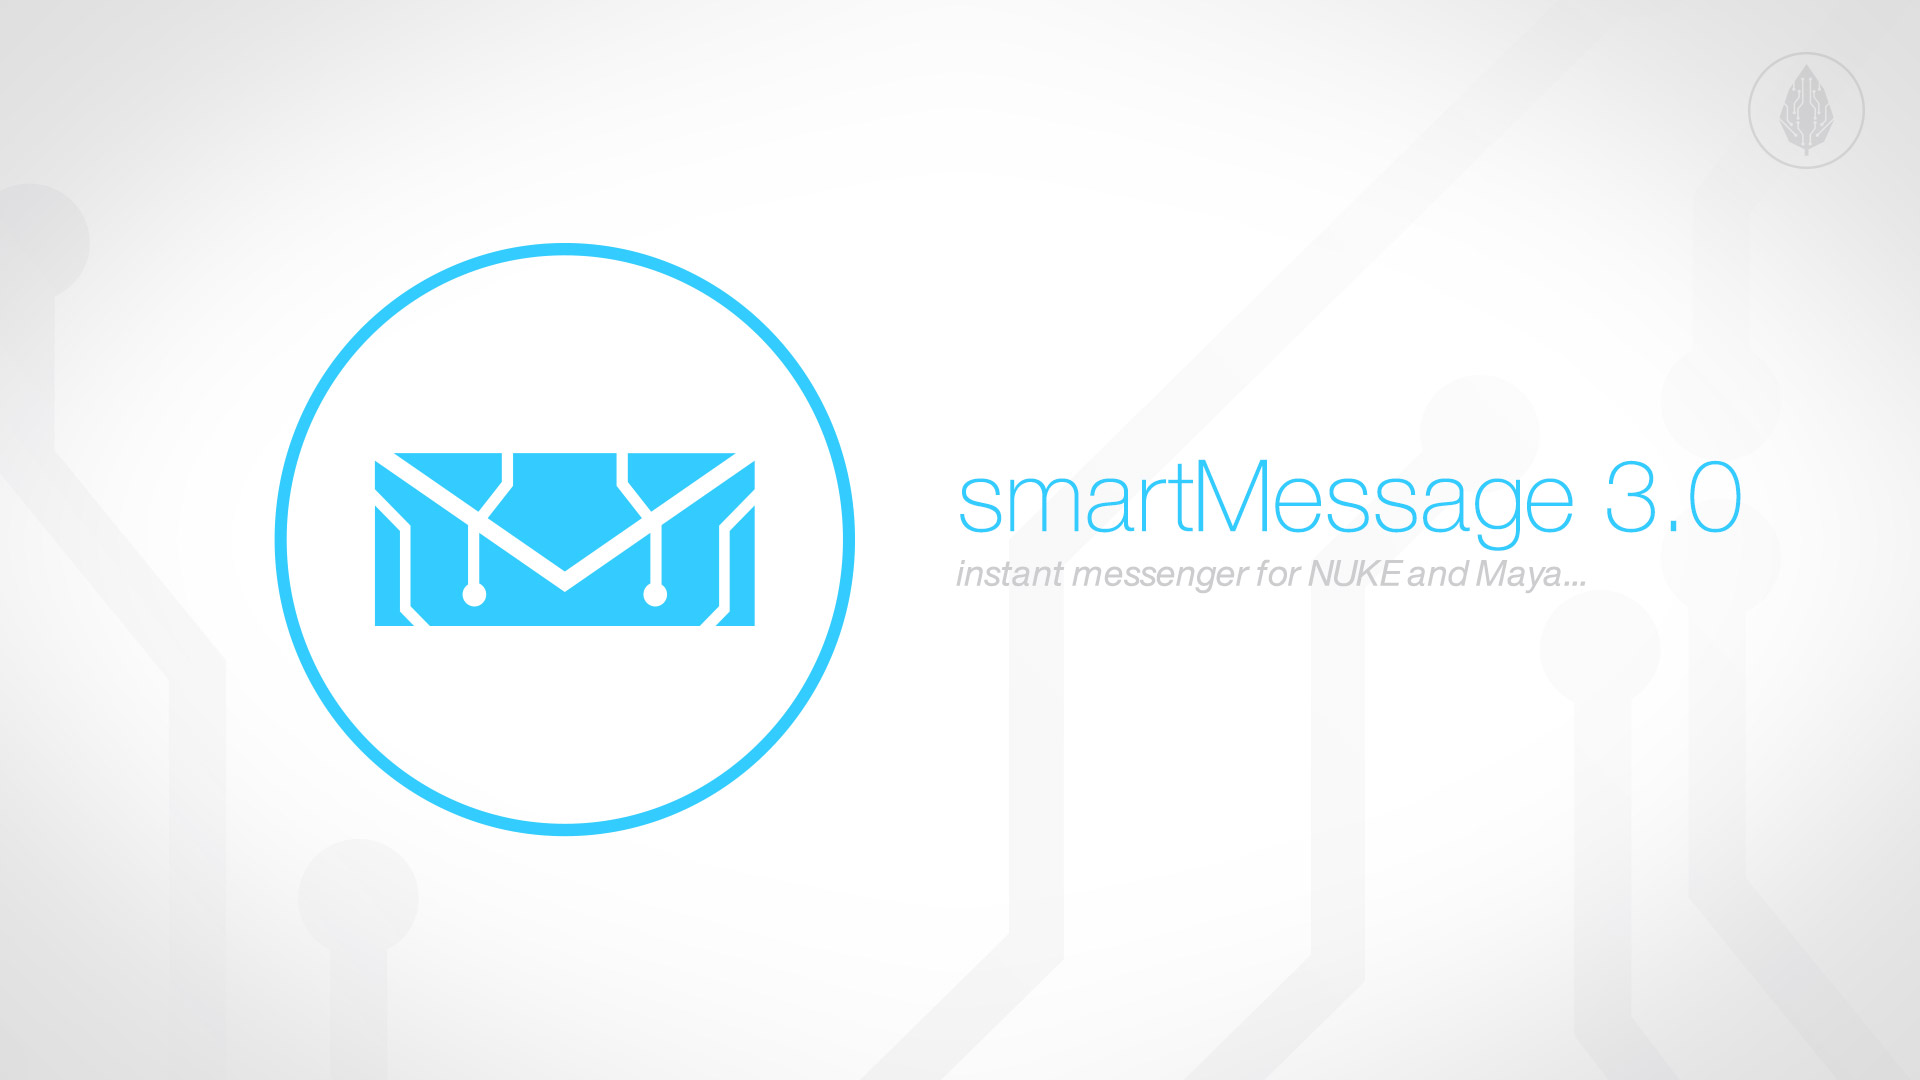 Published smartMessage 3.0